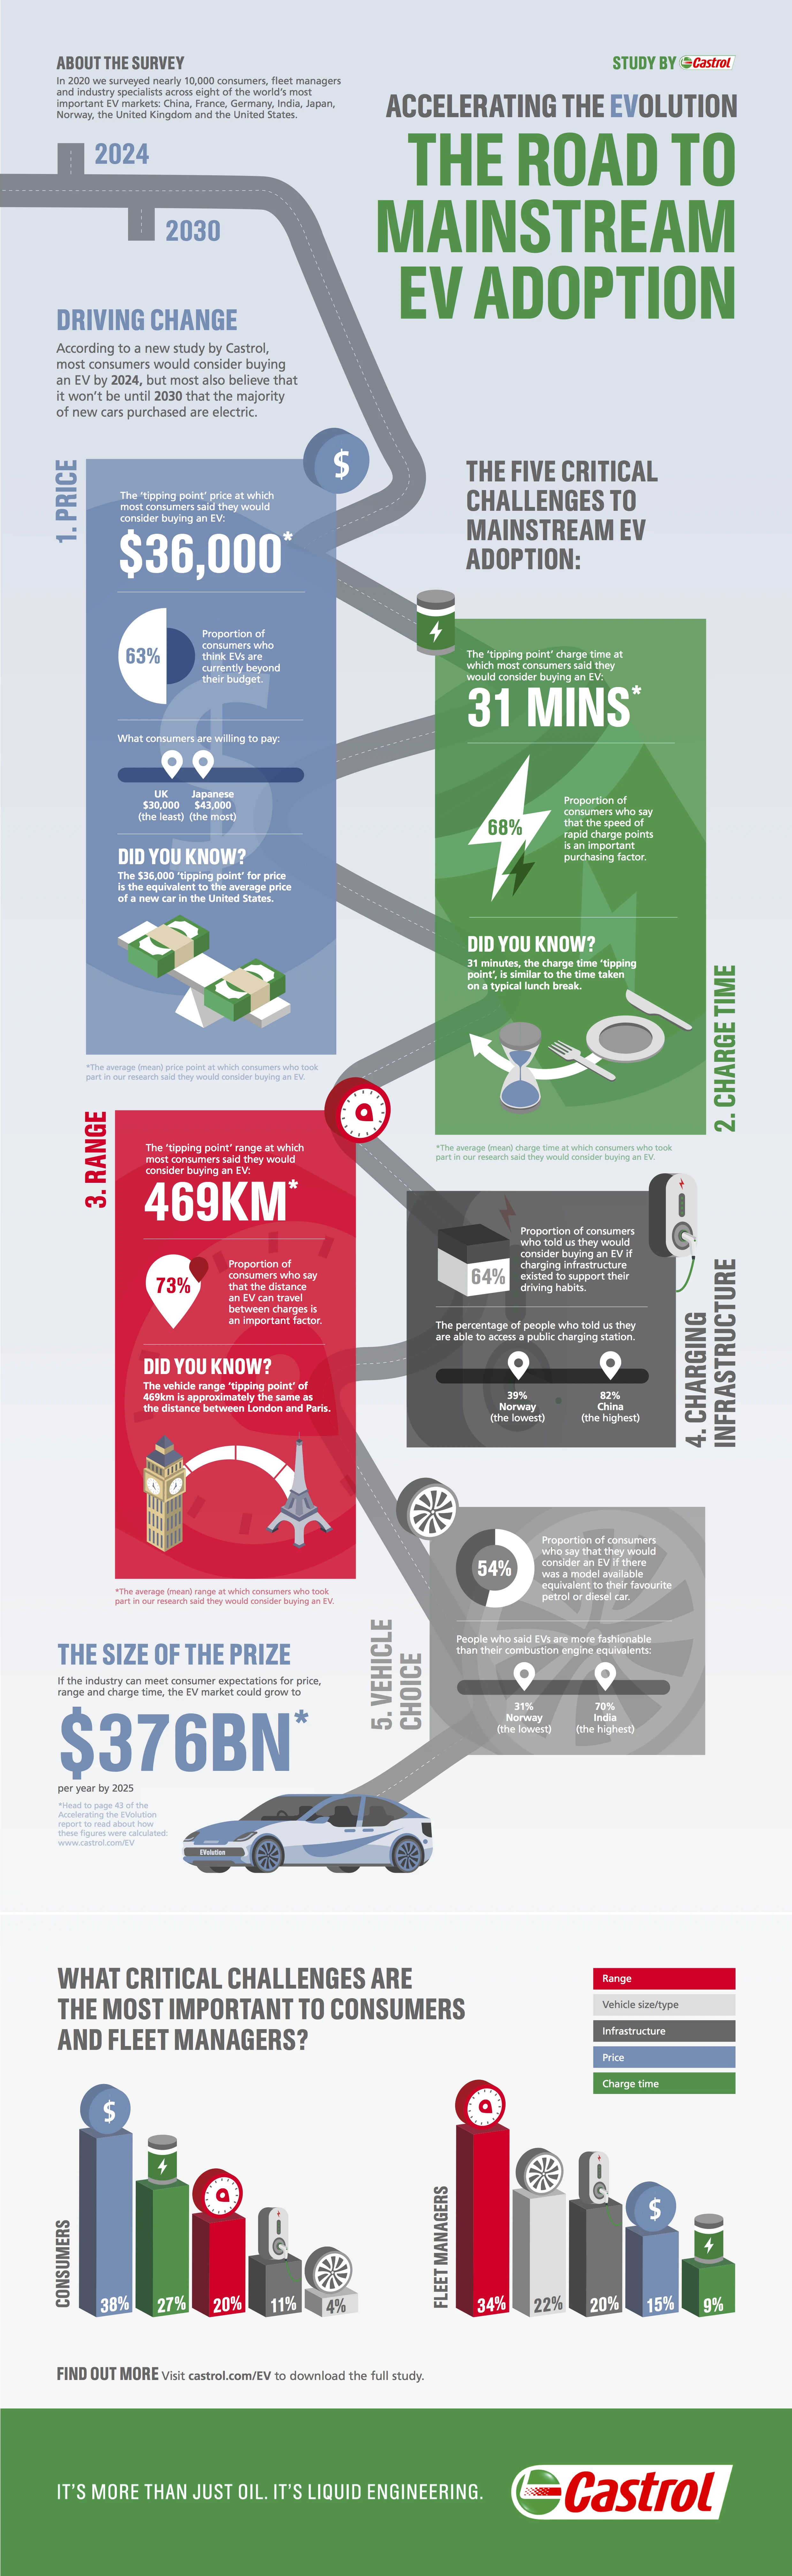 accelerating_the_evolution_global_infographic_castrol.png